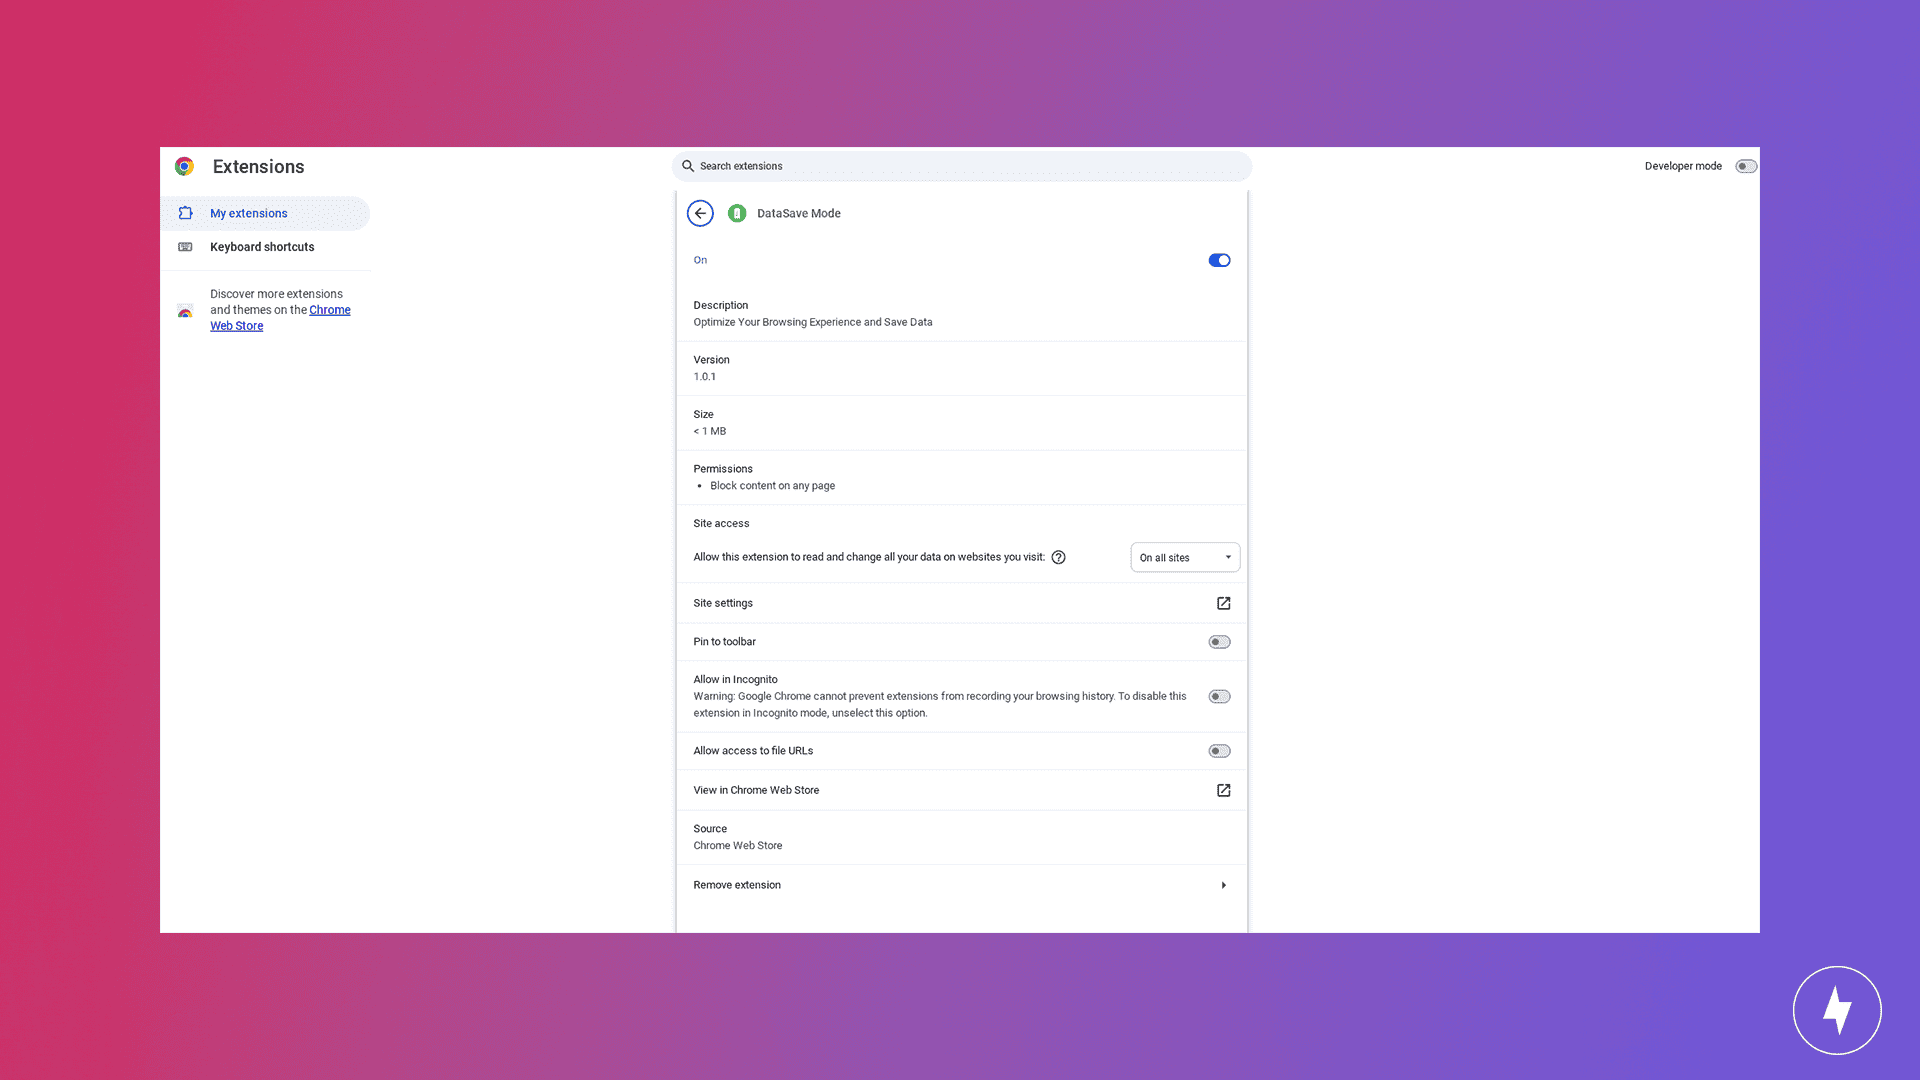 Screenshot of the settings for DataSave Mode, a Google Chrome extension